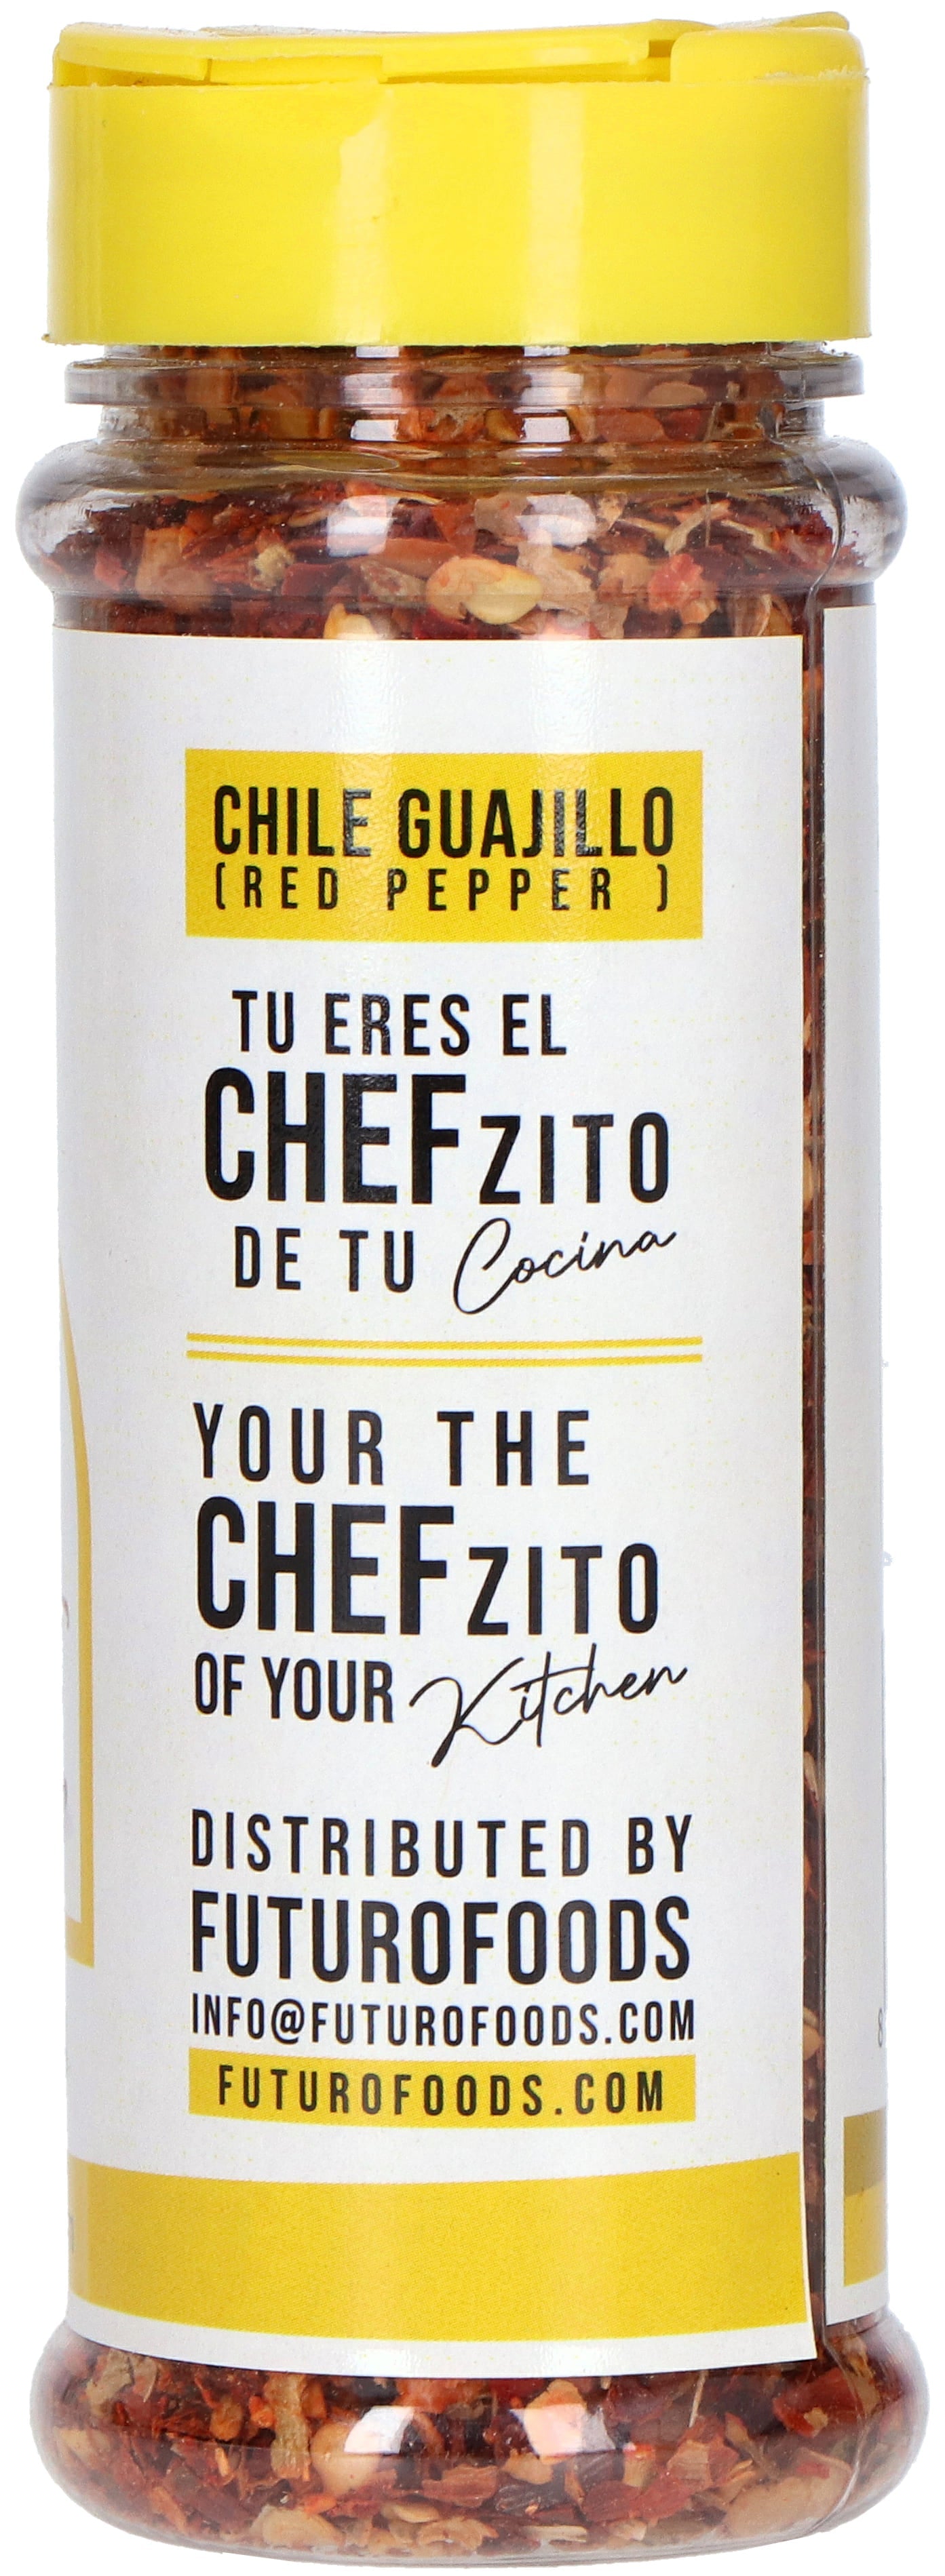 Up Your Life with Chefzito's Crushed Pepper - Now! – Foods